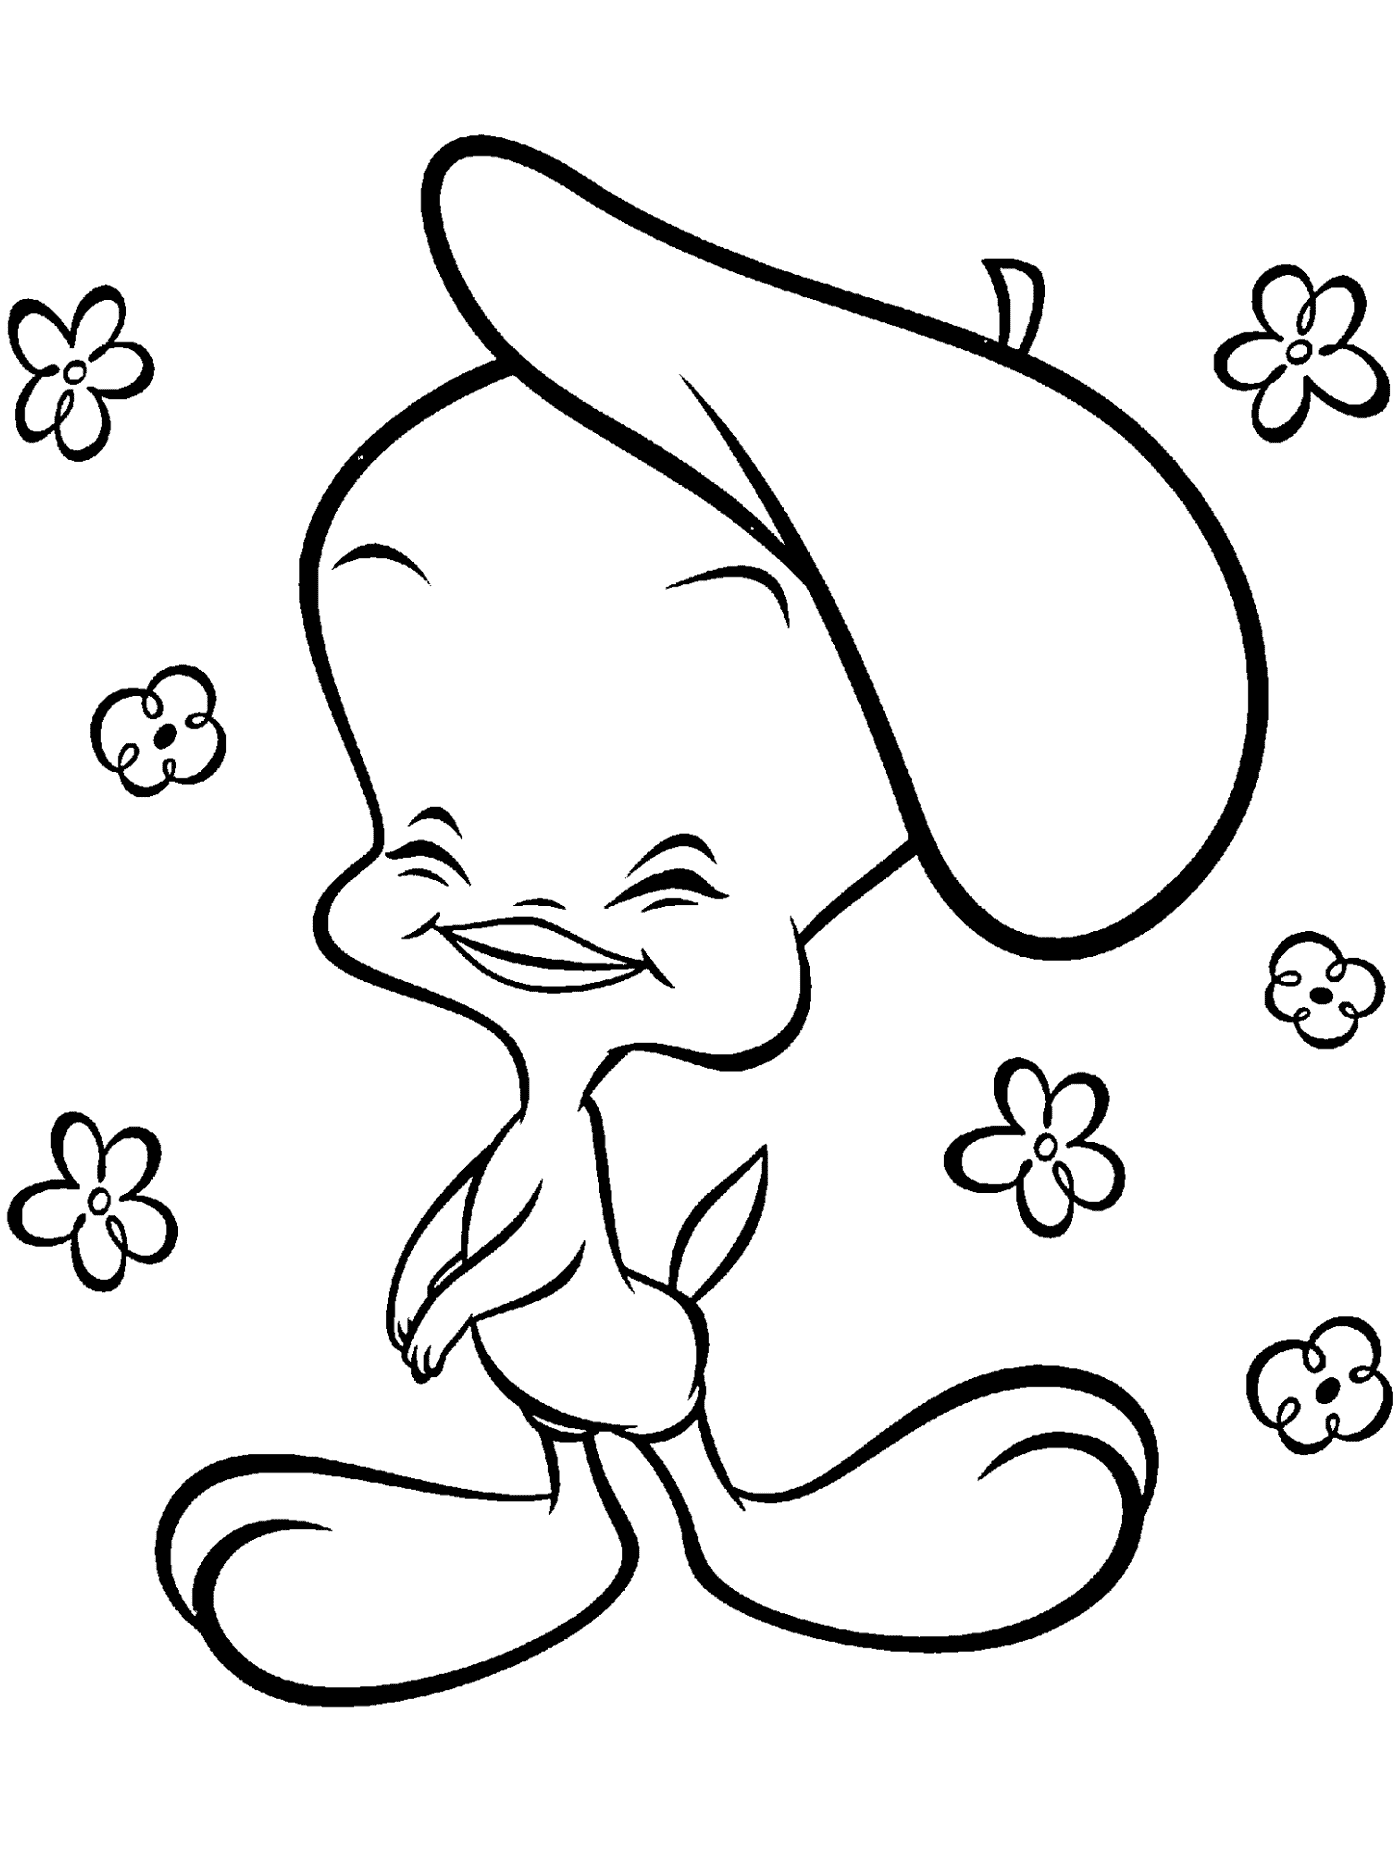 bird coloring sheet birds free to color for children birds kids coloring pages coloring sheet bird 